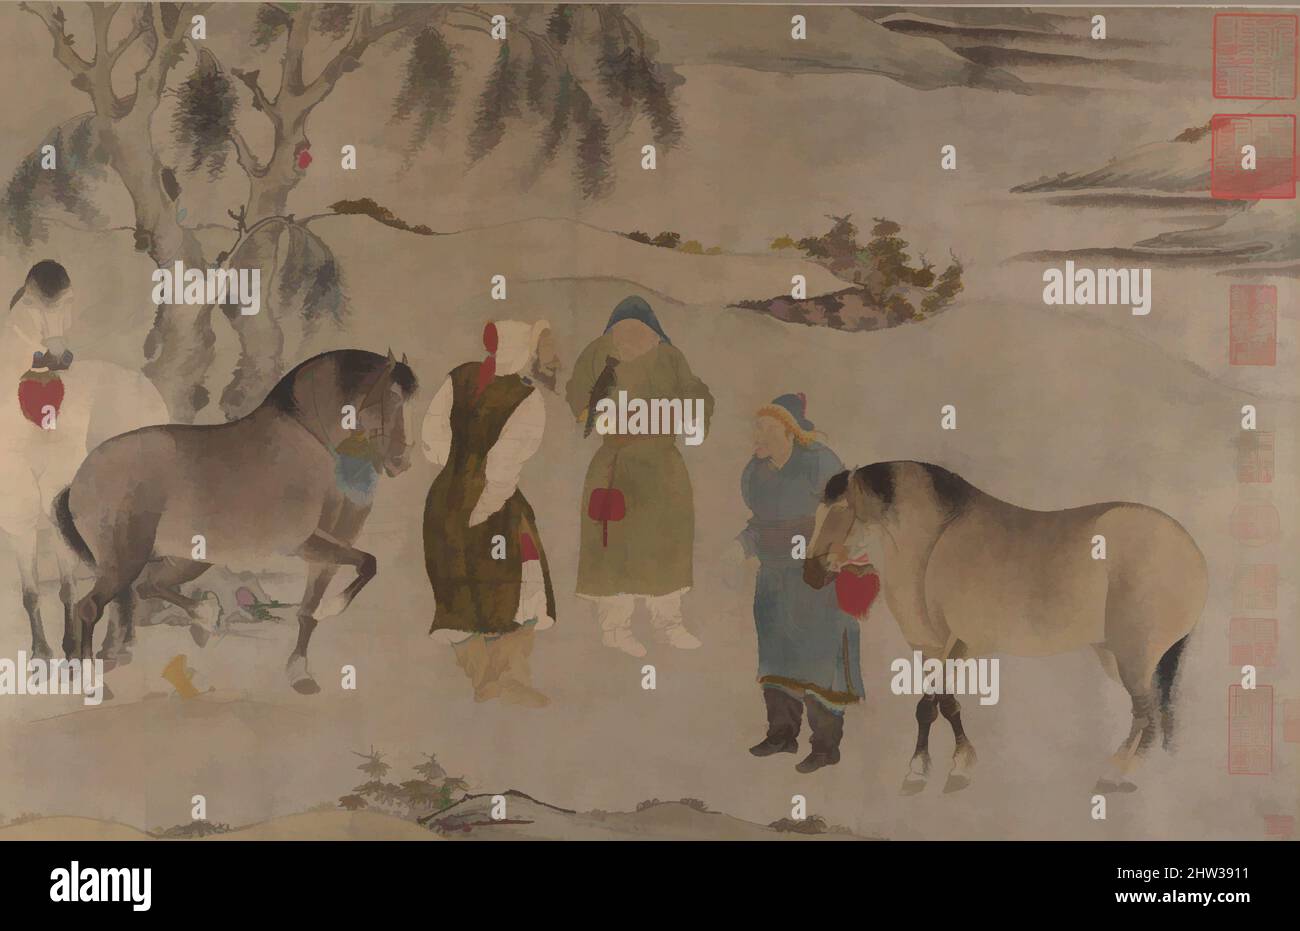 Art inspired by 南宋/元 佚名 六馬圖 卷, Six Horses, 13th–14th century, China, Handscroll; ink and color on paper, Image: 18 3/16 x 66 1/4 in. (46.2 x 168.3 cm), Paintings, Unidentified Artists Chinese, 13th c. (1st half scroll); 14th c. (2nd half), The disparities in paper, pigment, and style, Classic works modernized by Artotop with a splash of modernity. Shapes, color and value, eye-catching visual impact on art. Emotions through freedom of artworks in a contemporary way. A timeless message pursuing a wildly creative new direction. Artists turning to the digital medium and creating the Artotop NFT Stock Photo